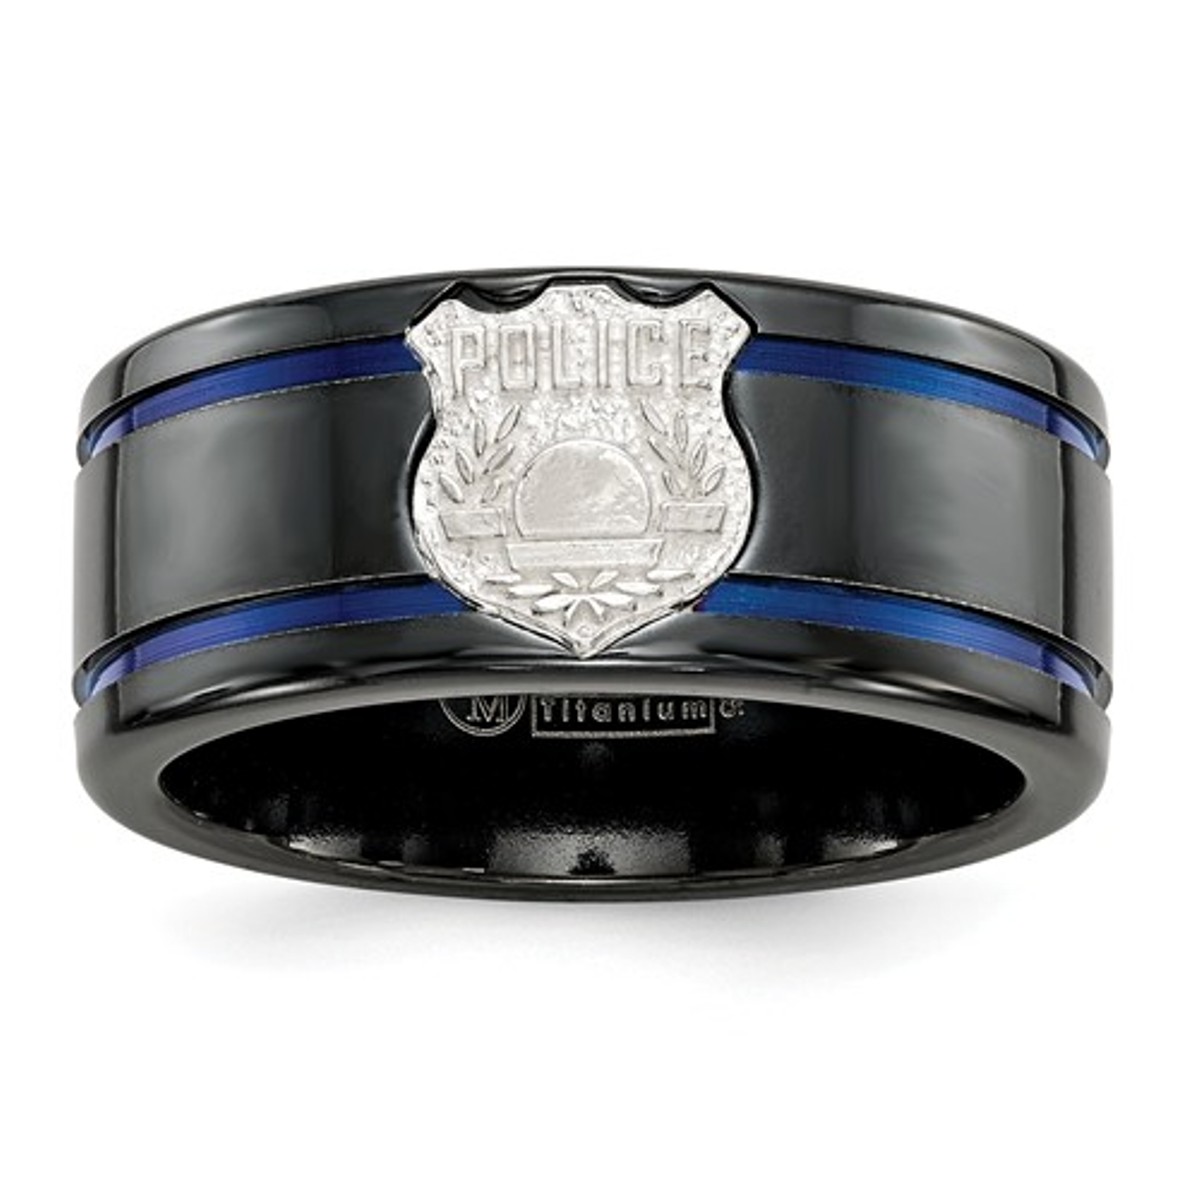  Black Ti Blue Anodized With SS Police Shield Tag 10mm Band